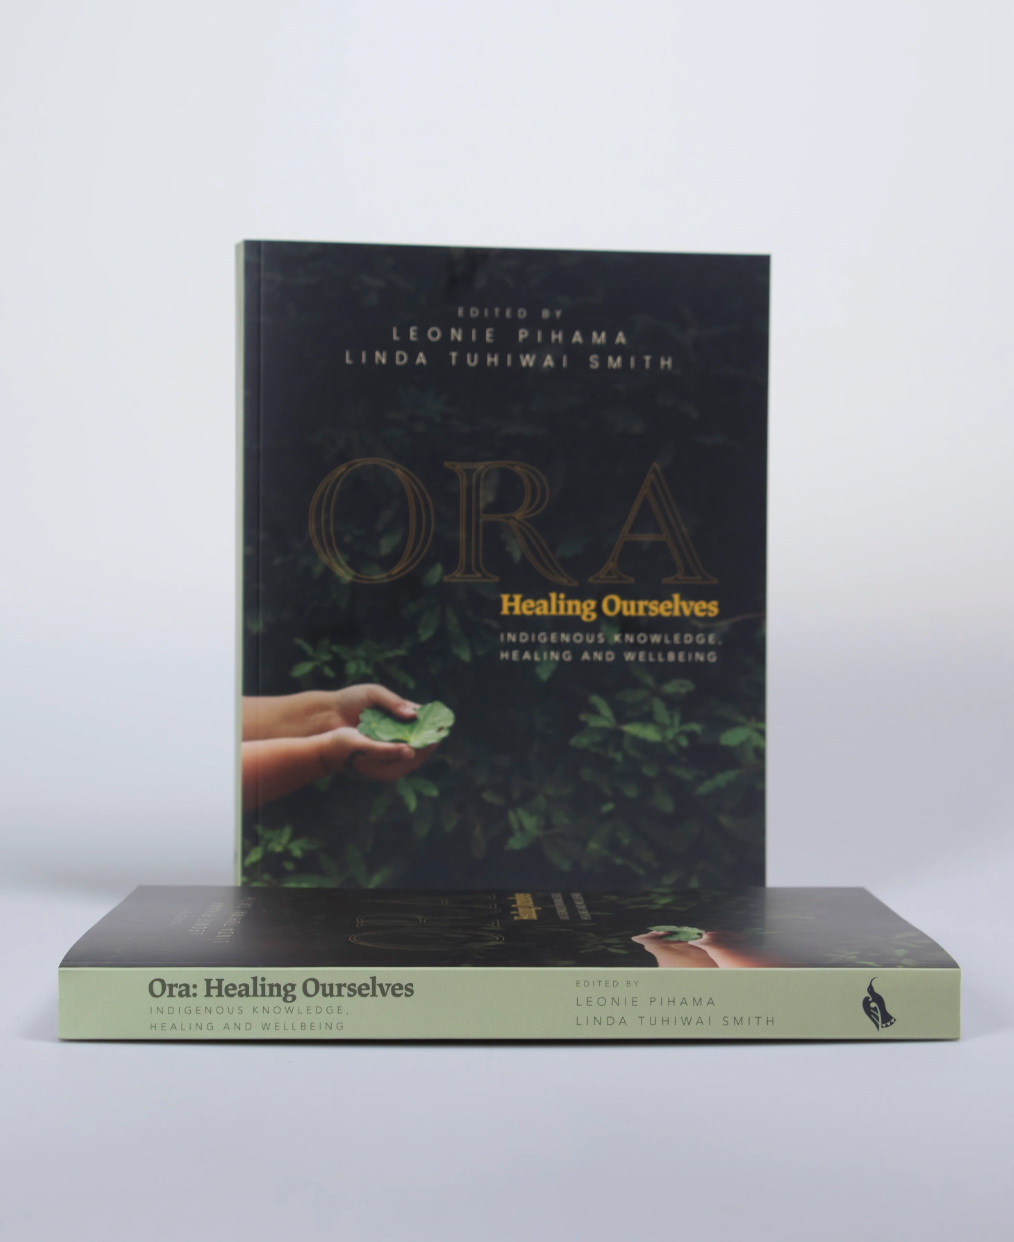 Ora: Healing Ourselves - Indigenous Knowledge Healing and Wellbeing edited by Leonie Pihama & Linda Tuhiwai Smith